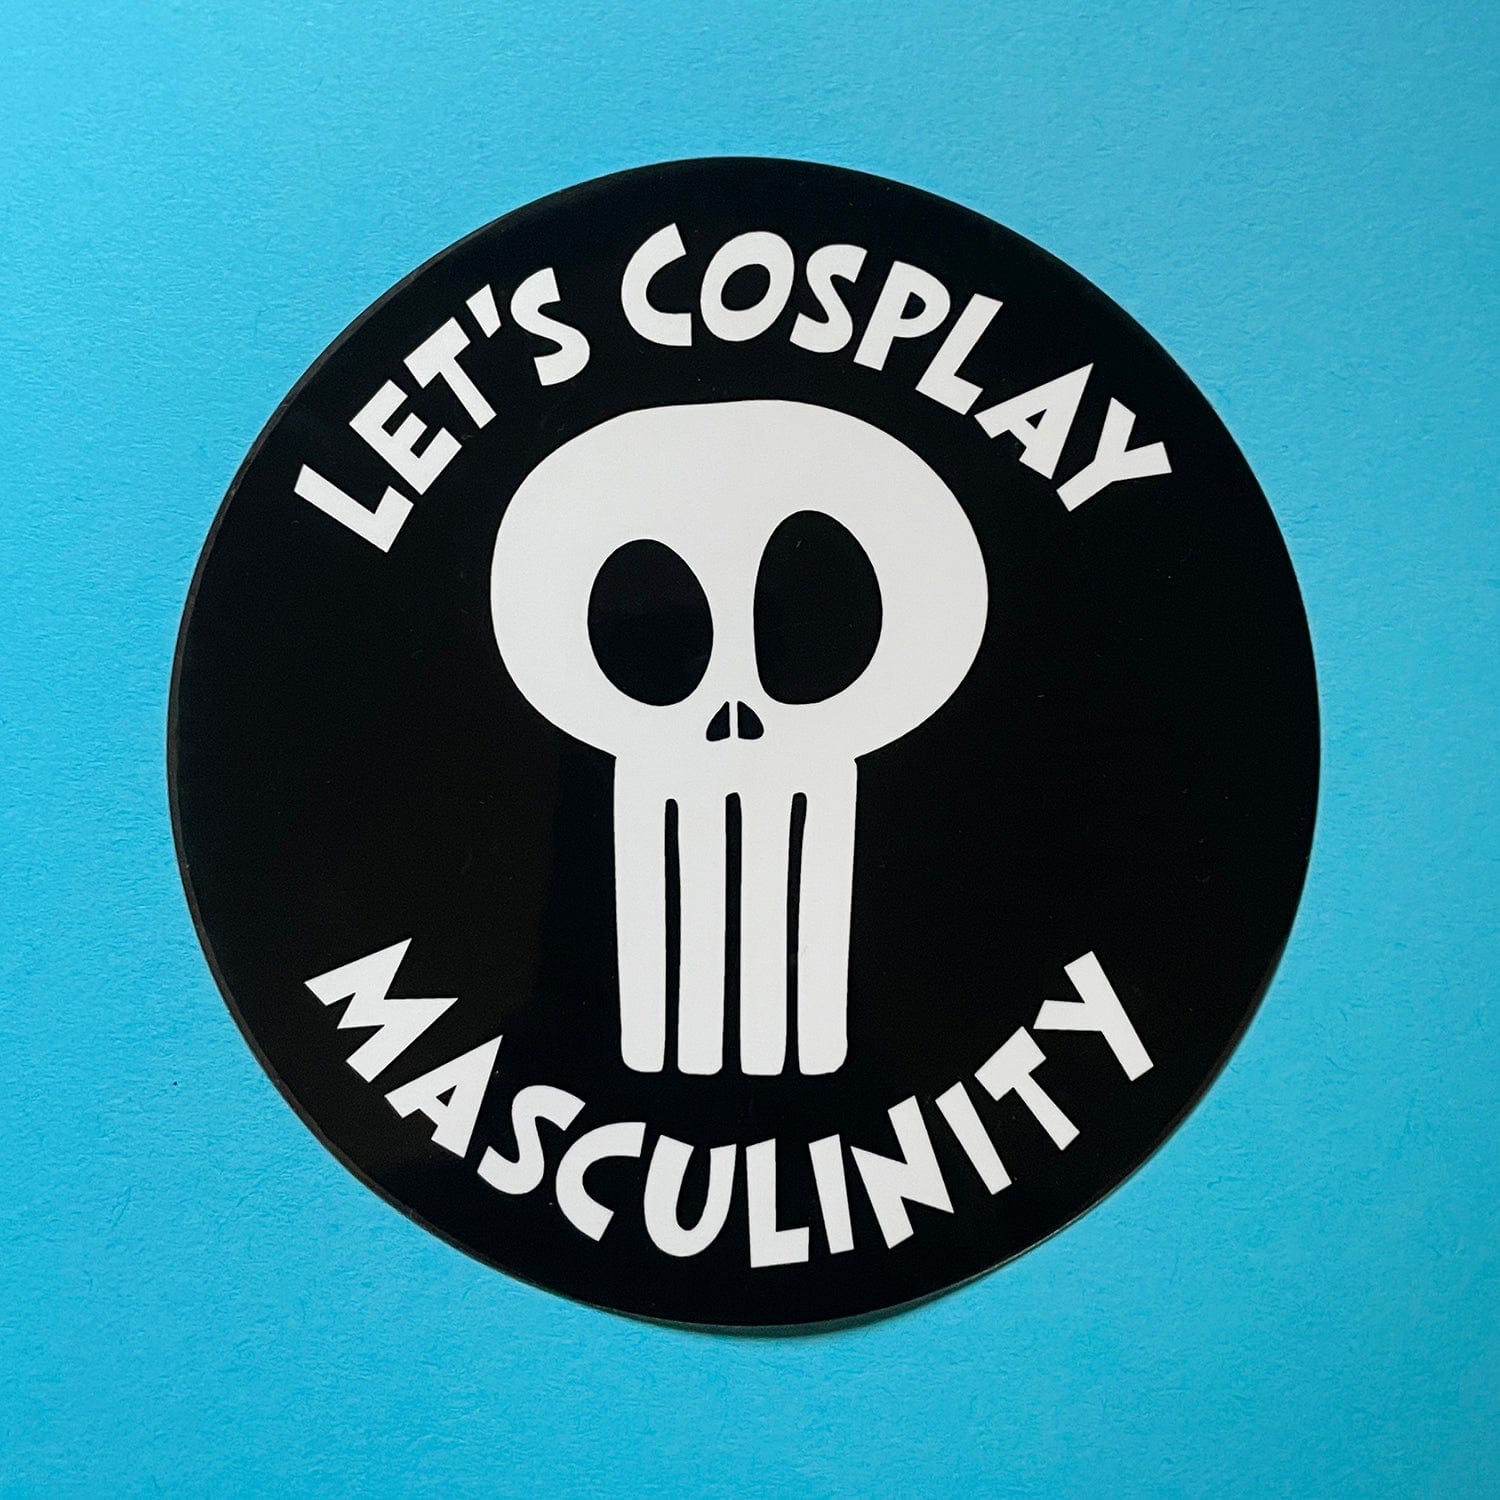 Let's Cosplay Masculinity - Sticker, 3.5 Diameter | Dissent Pins